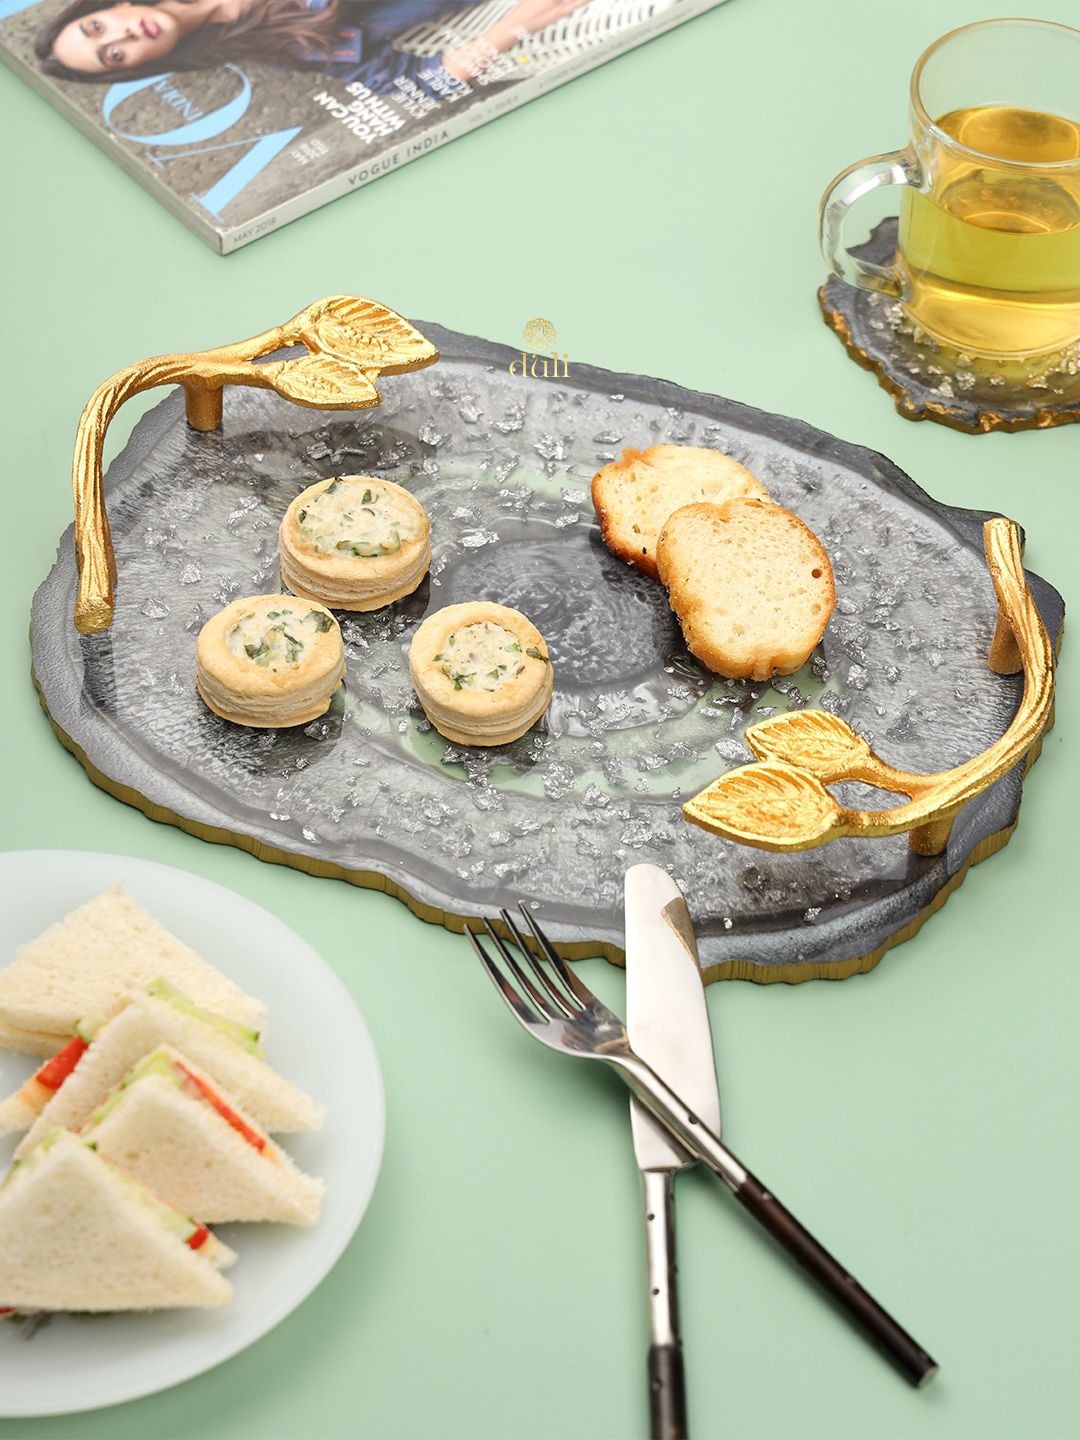 DULI Grey & Gold-Toned Textured Serving Tray Platter Price in India